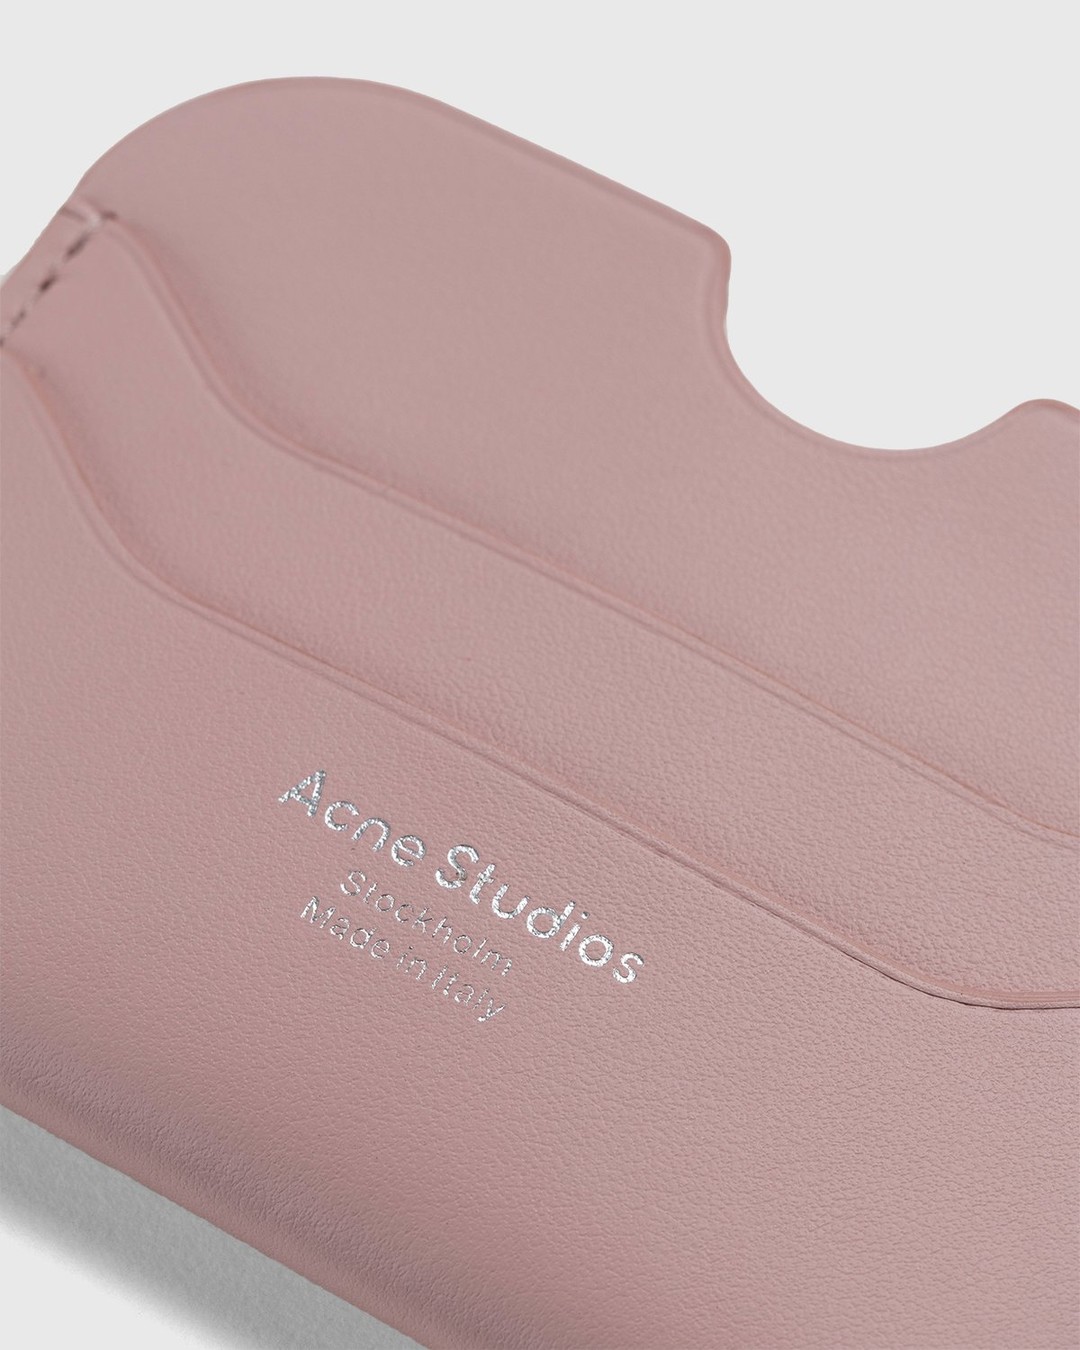 Acne Studios – Leather Card Case Powder Pink - Wallets - Pink - Image 3